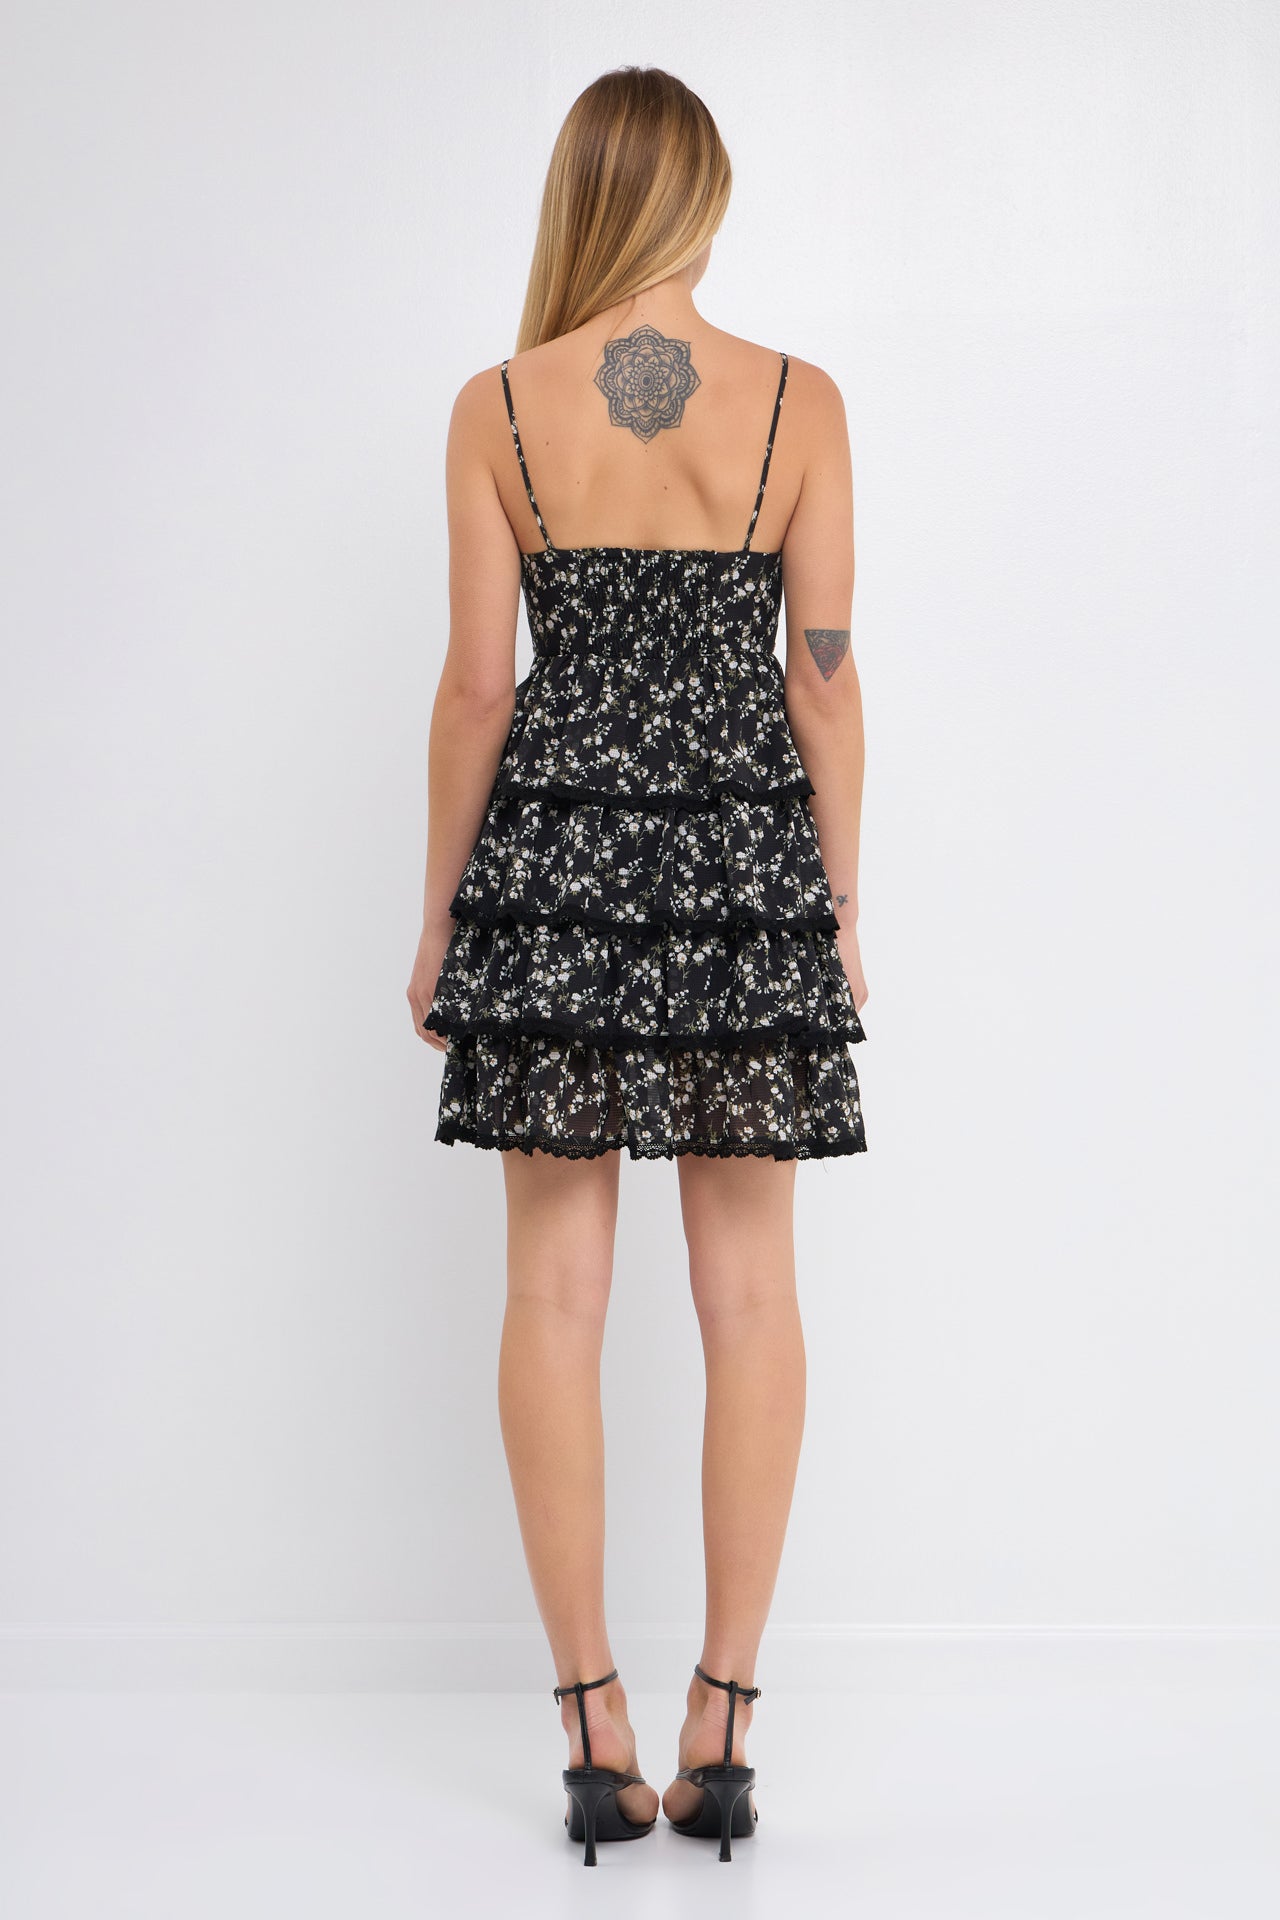 FREE THE ROSES - Floral Printed Tiered Mini Dress - DRESSES available at Objectrare